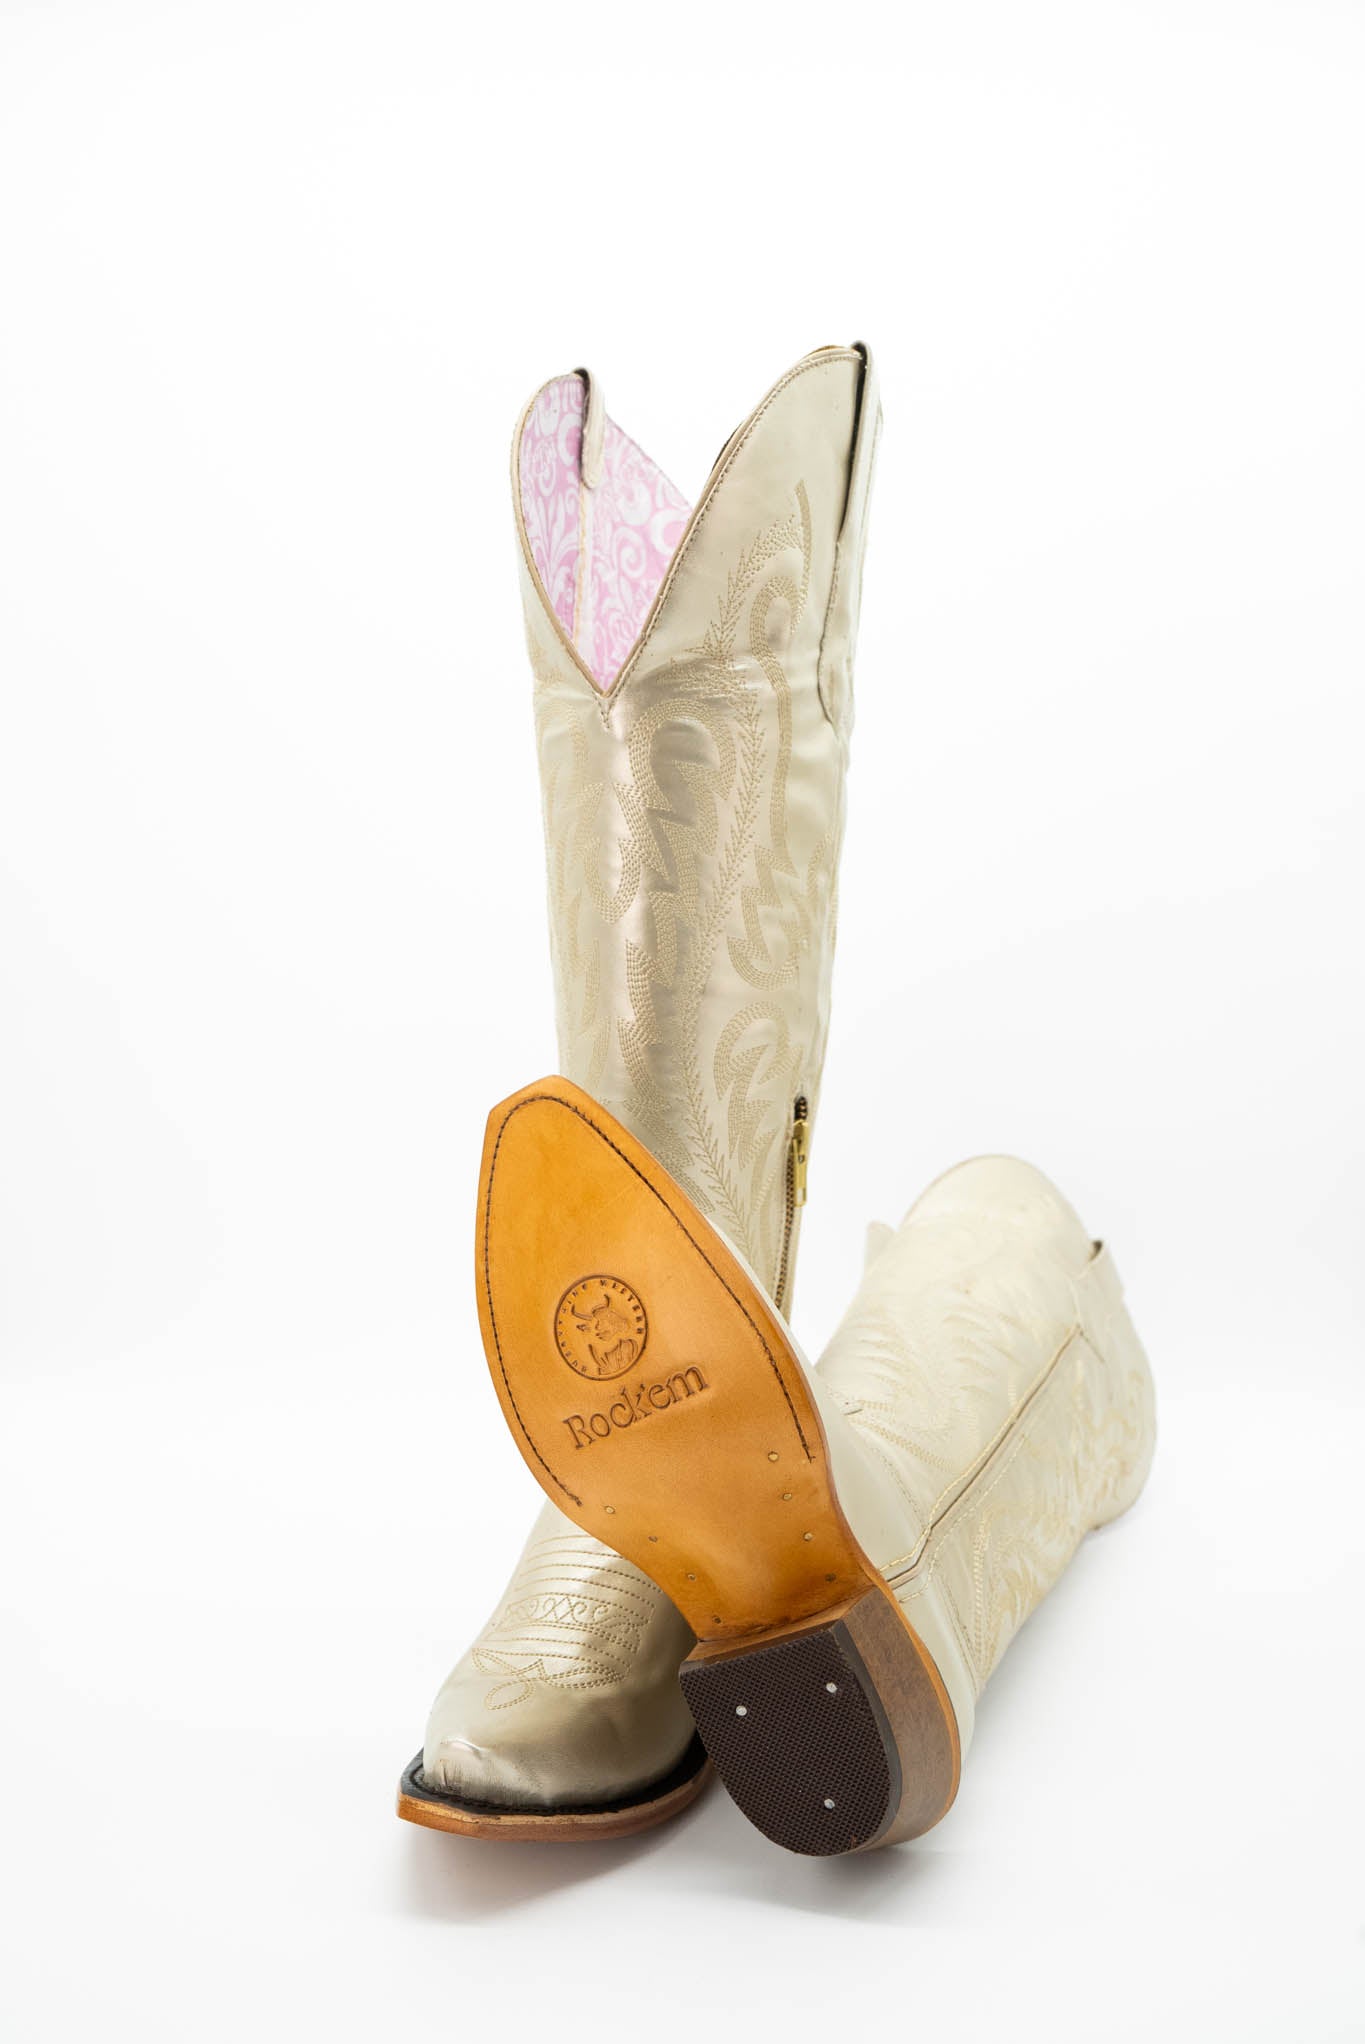 Gianna Textil Oro Metallic Wide Calf Friendly Tall Point Toe Cowgirl Boot